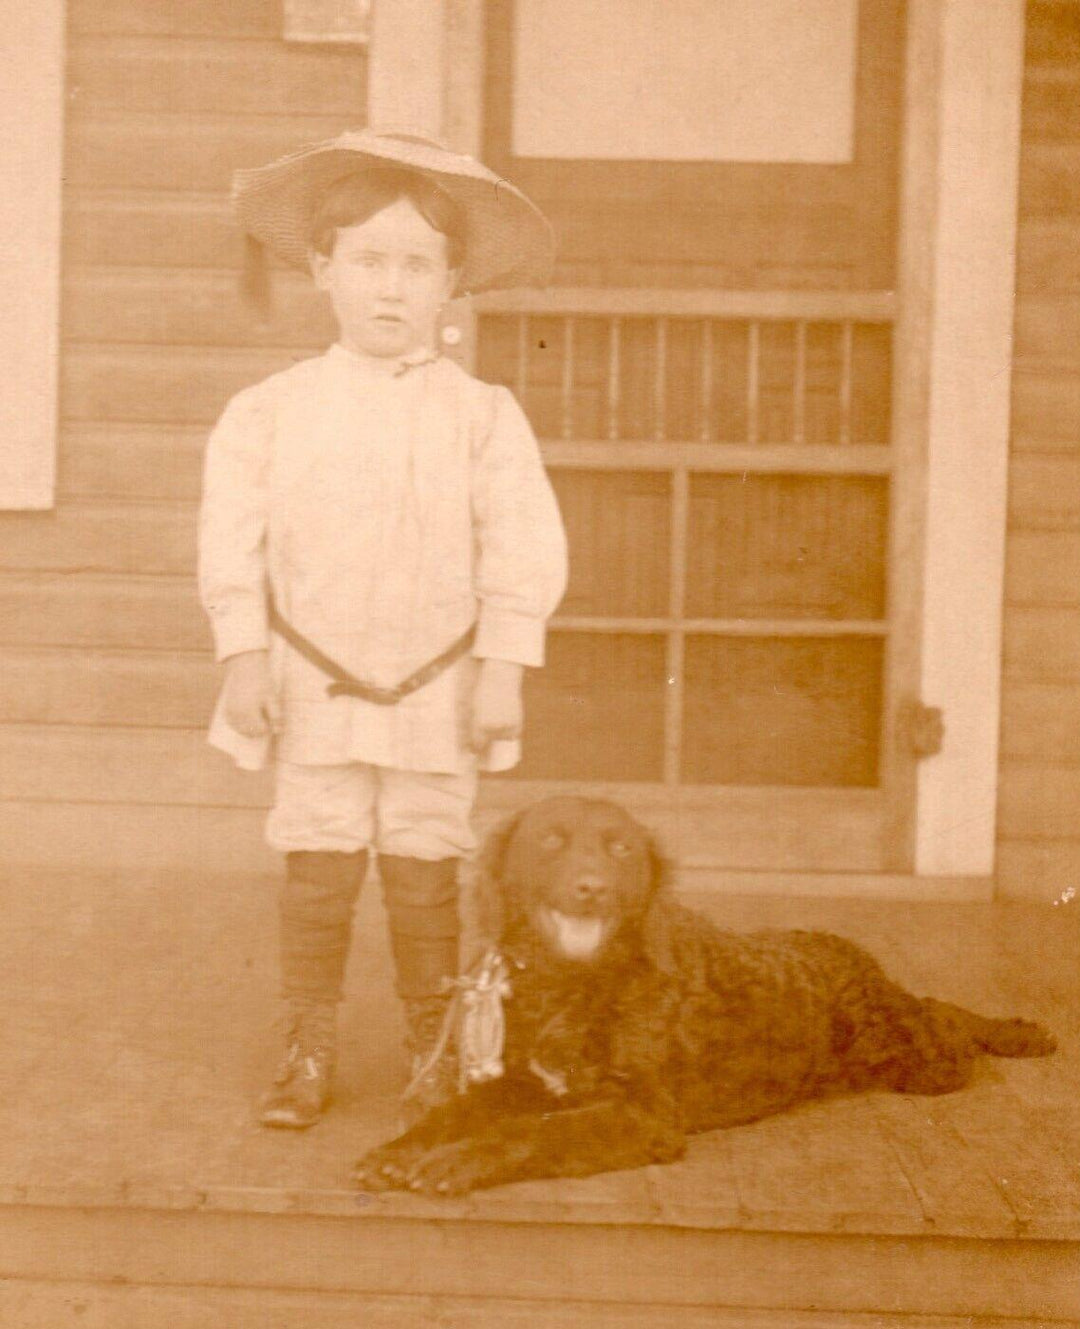 Darling Little Boy and Sweet Smiling Dog Oklahoma City IDd Antique Cabinet Photo